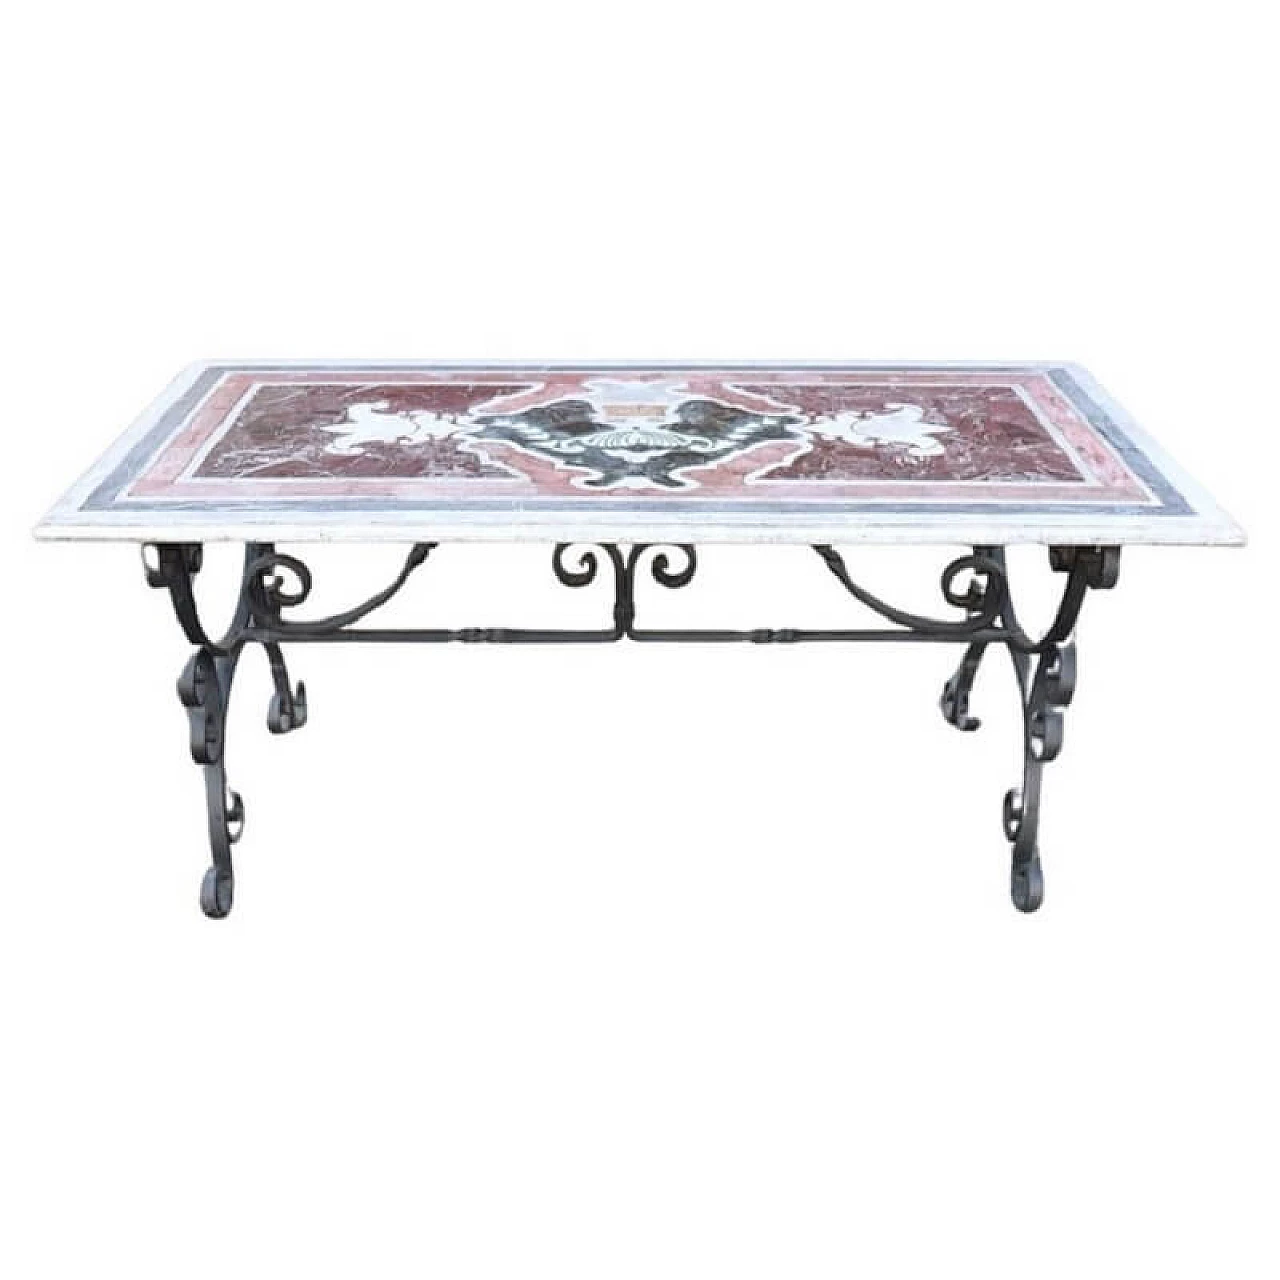 Iron garden table with marble top, 20th century 1